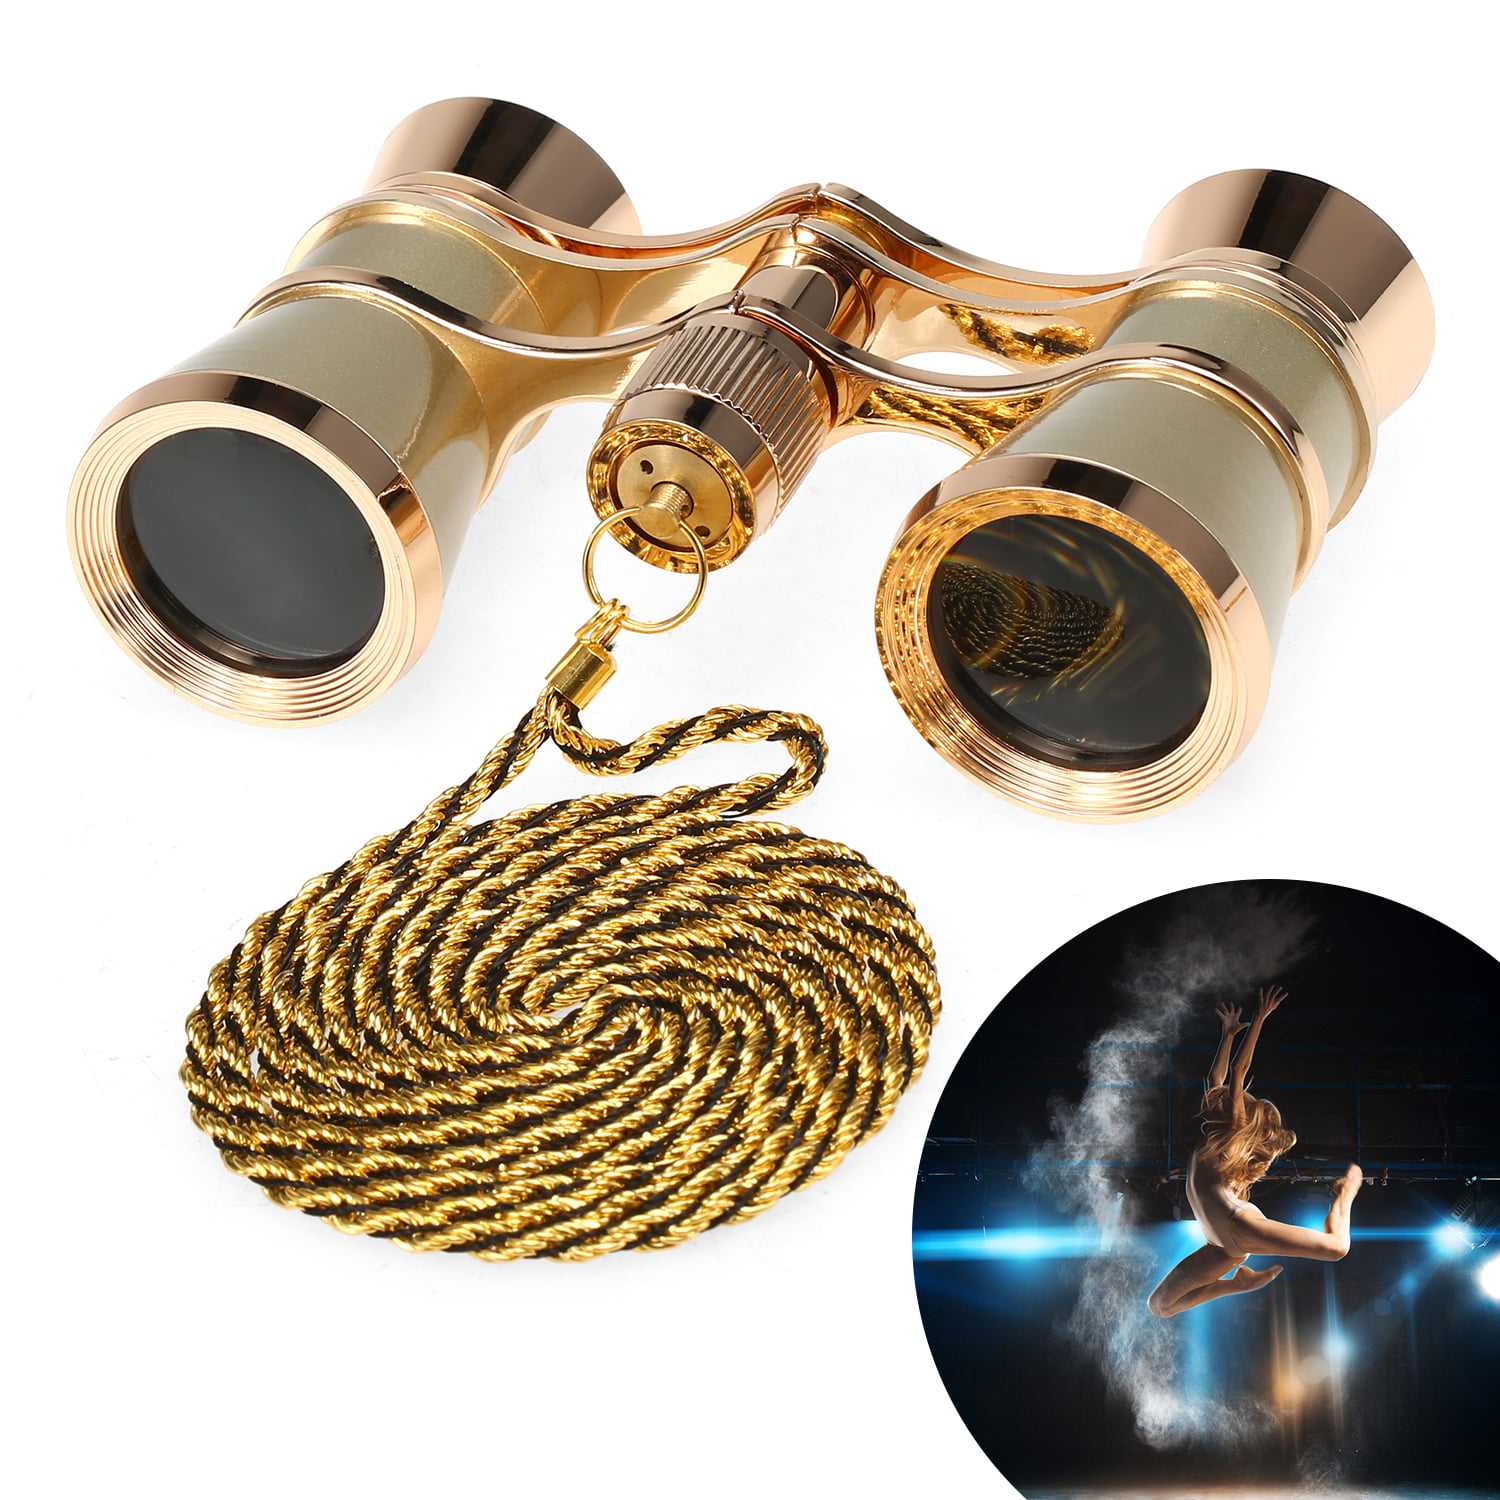 Kingscope 4X30 Vintage Opera Glasses Binoculars for Theater Musical Concert Gold, with Chain 